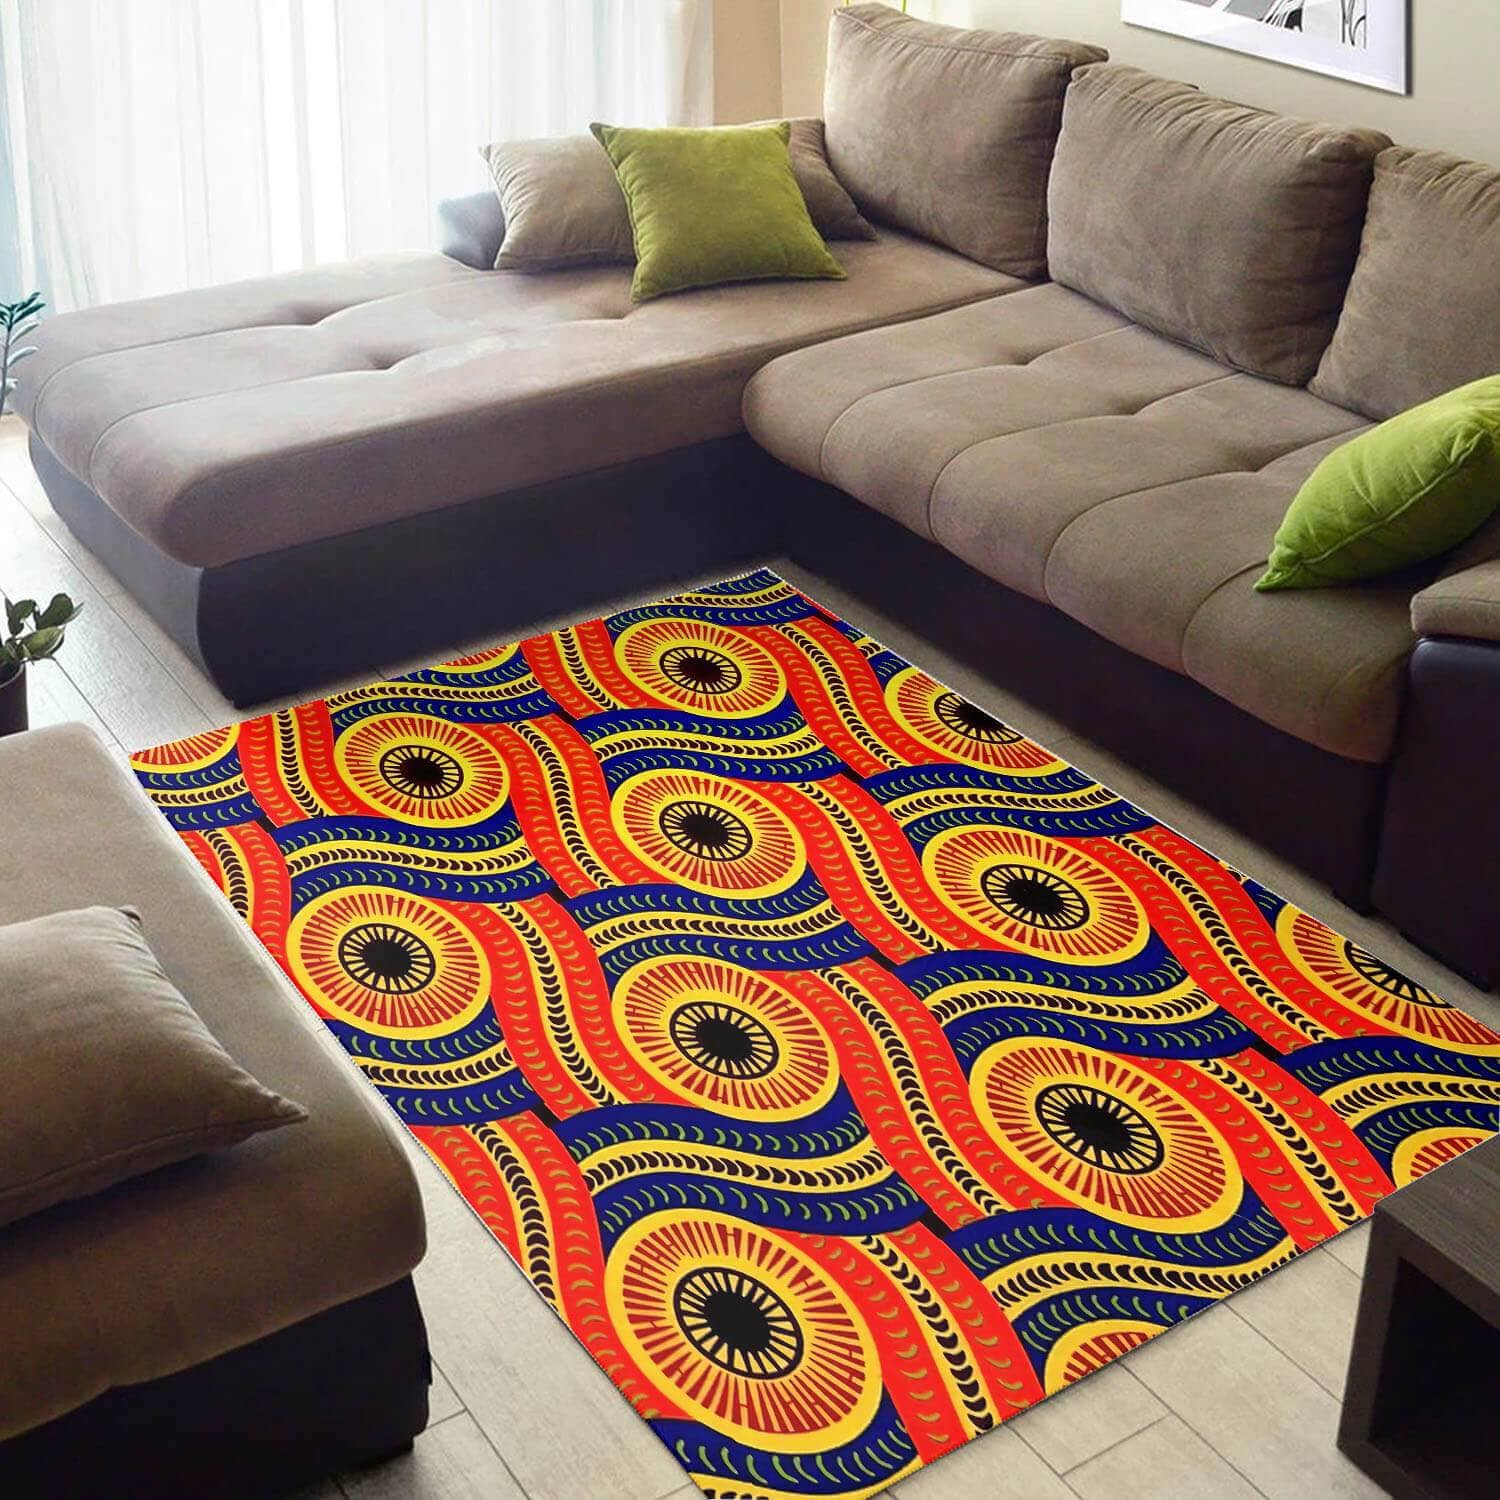 Cool African Holiday Natural Hair Afrocentric Art Design Floor Carpet Inspired Living Room Rug